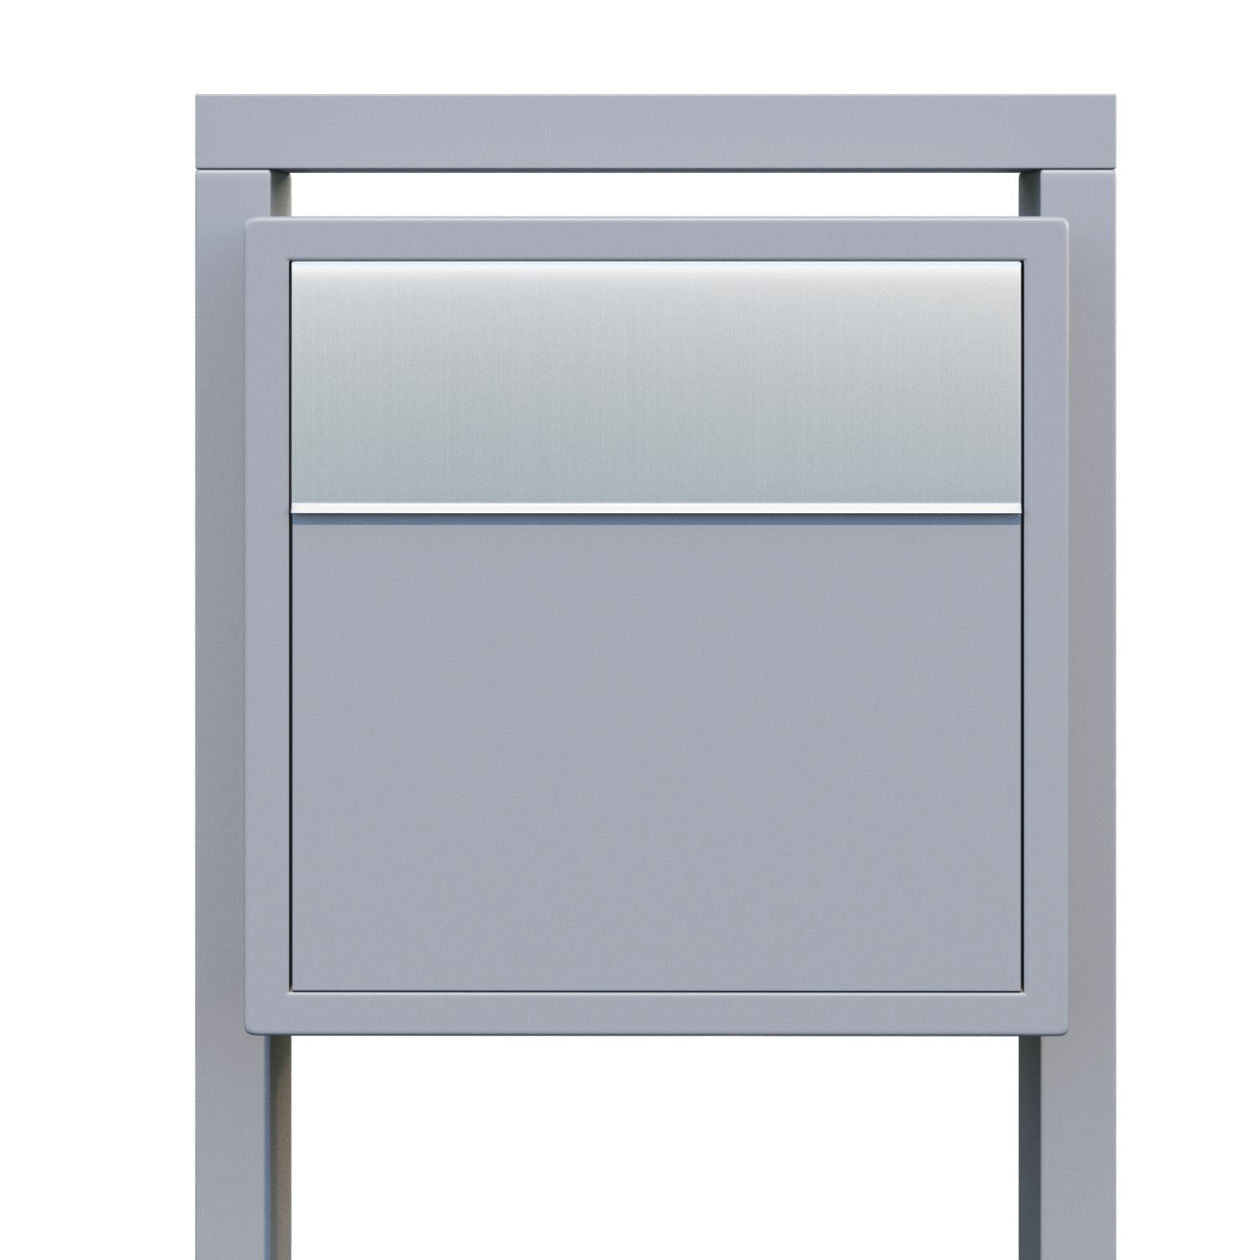 SOPRANO by Bravios - Modern post-mounted gray mailbox with stainless steel flap